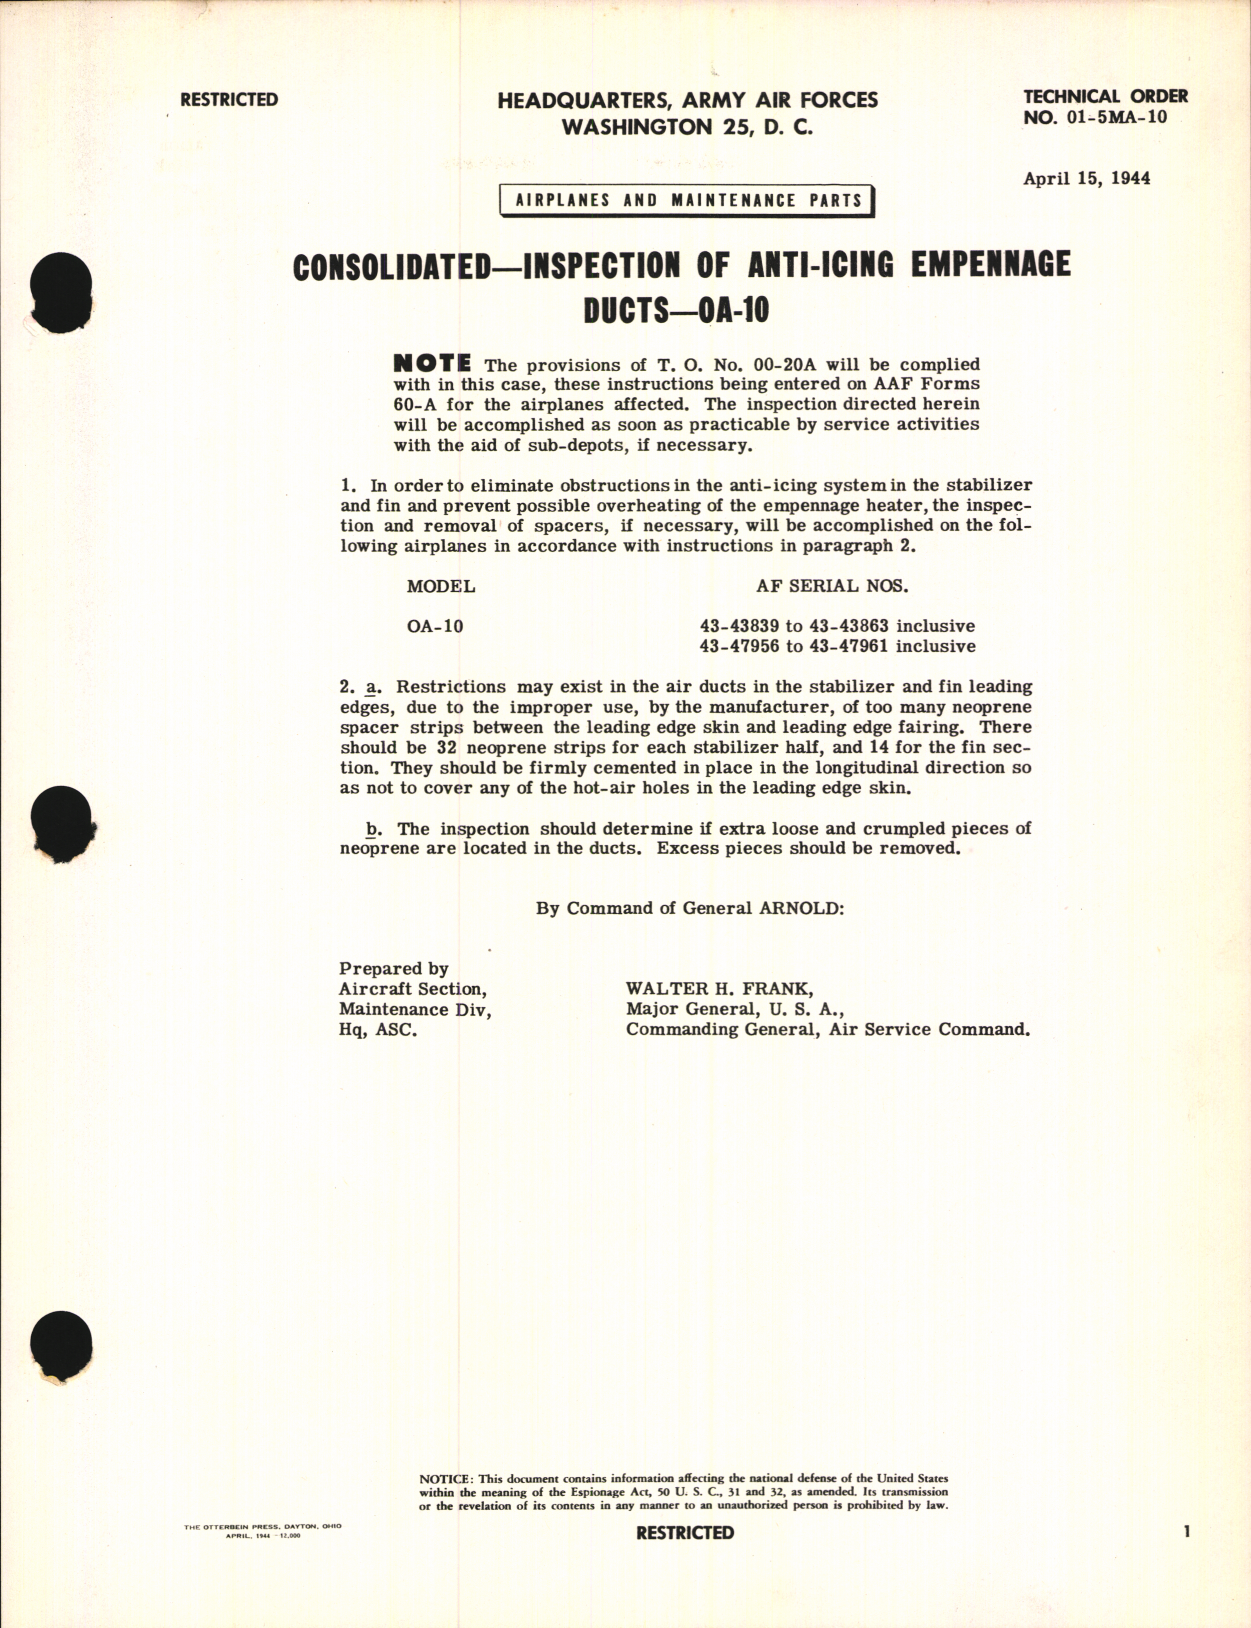 Sample page 1 from AirCorps Library document: Inspection of Anti-Icing Empennage Ducts for OA-10